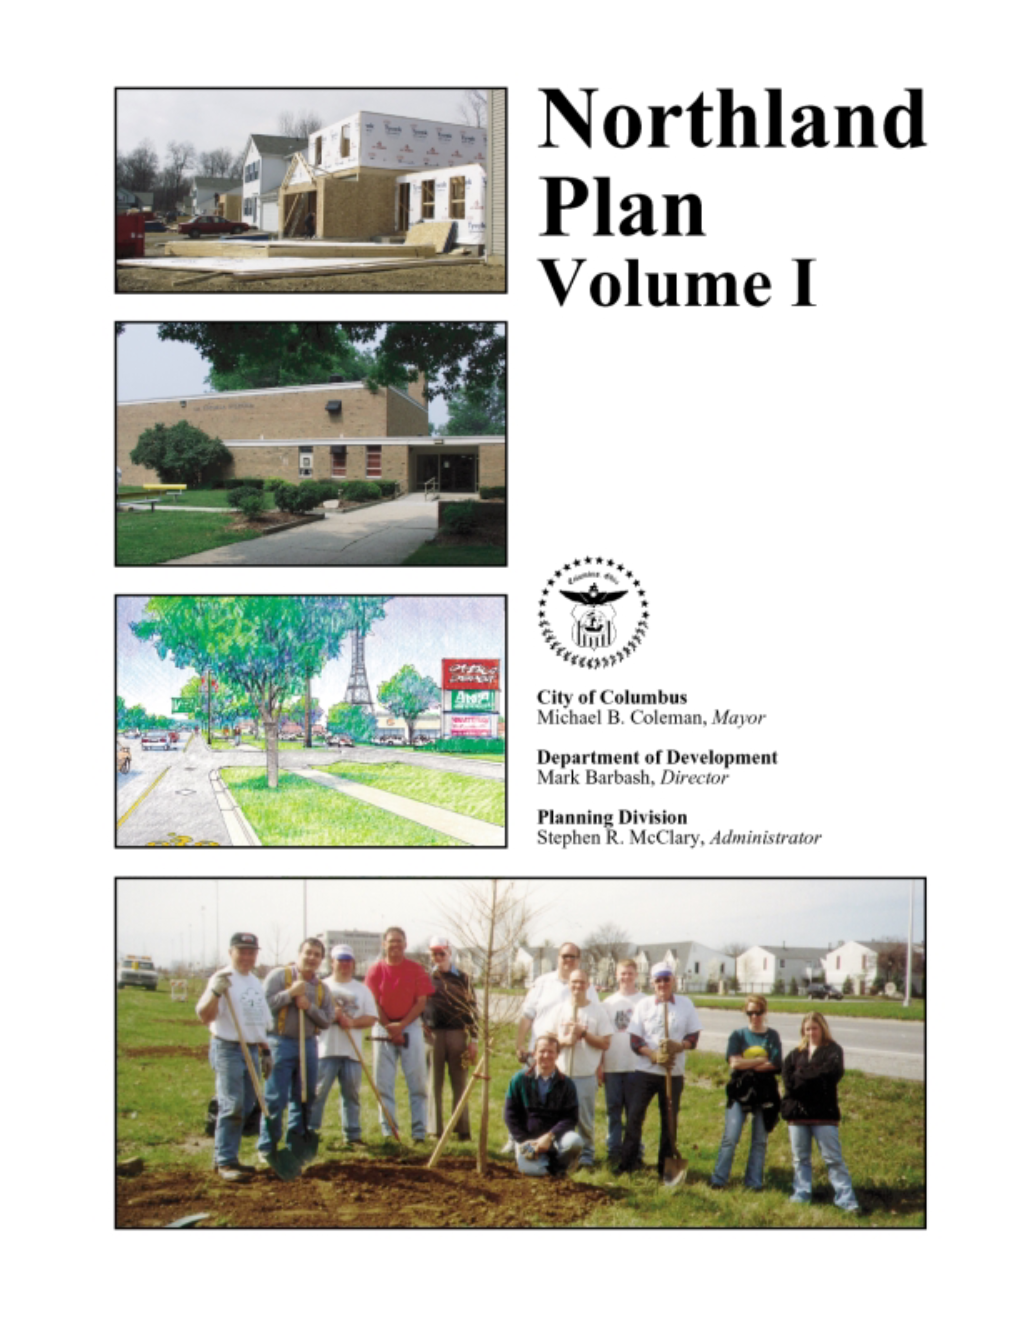 Northland Plan - Volume I As the City’S Long-Range Guide for Development, Redevelopment and Improvement of the Physical Environment in the Northland Area